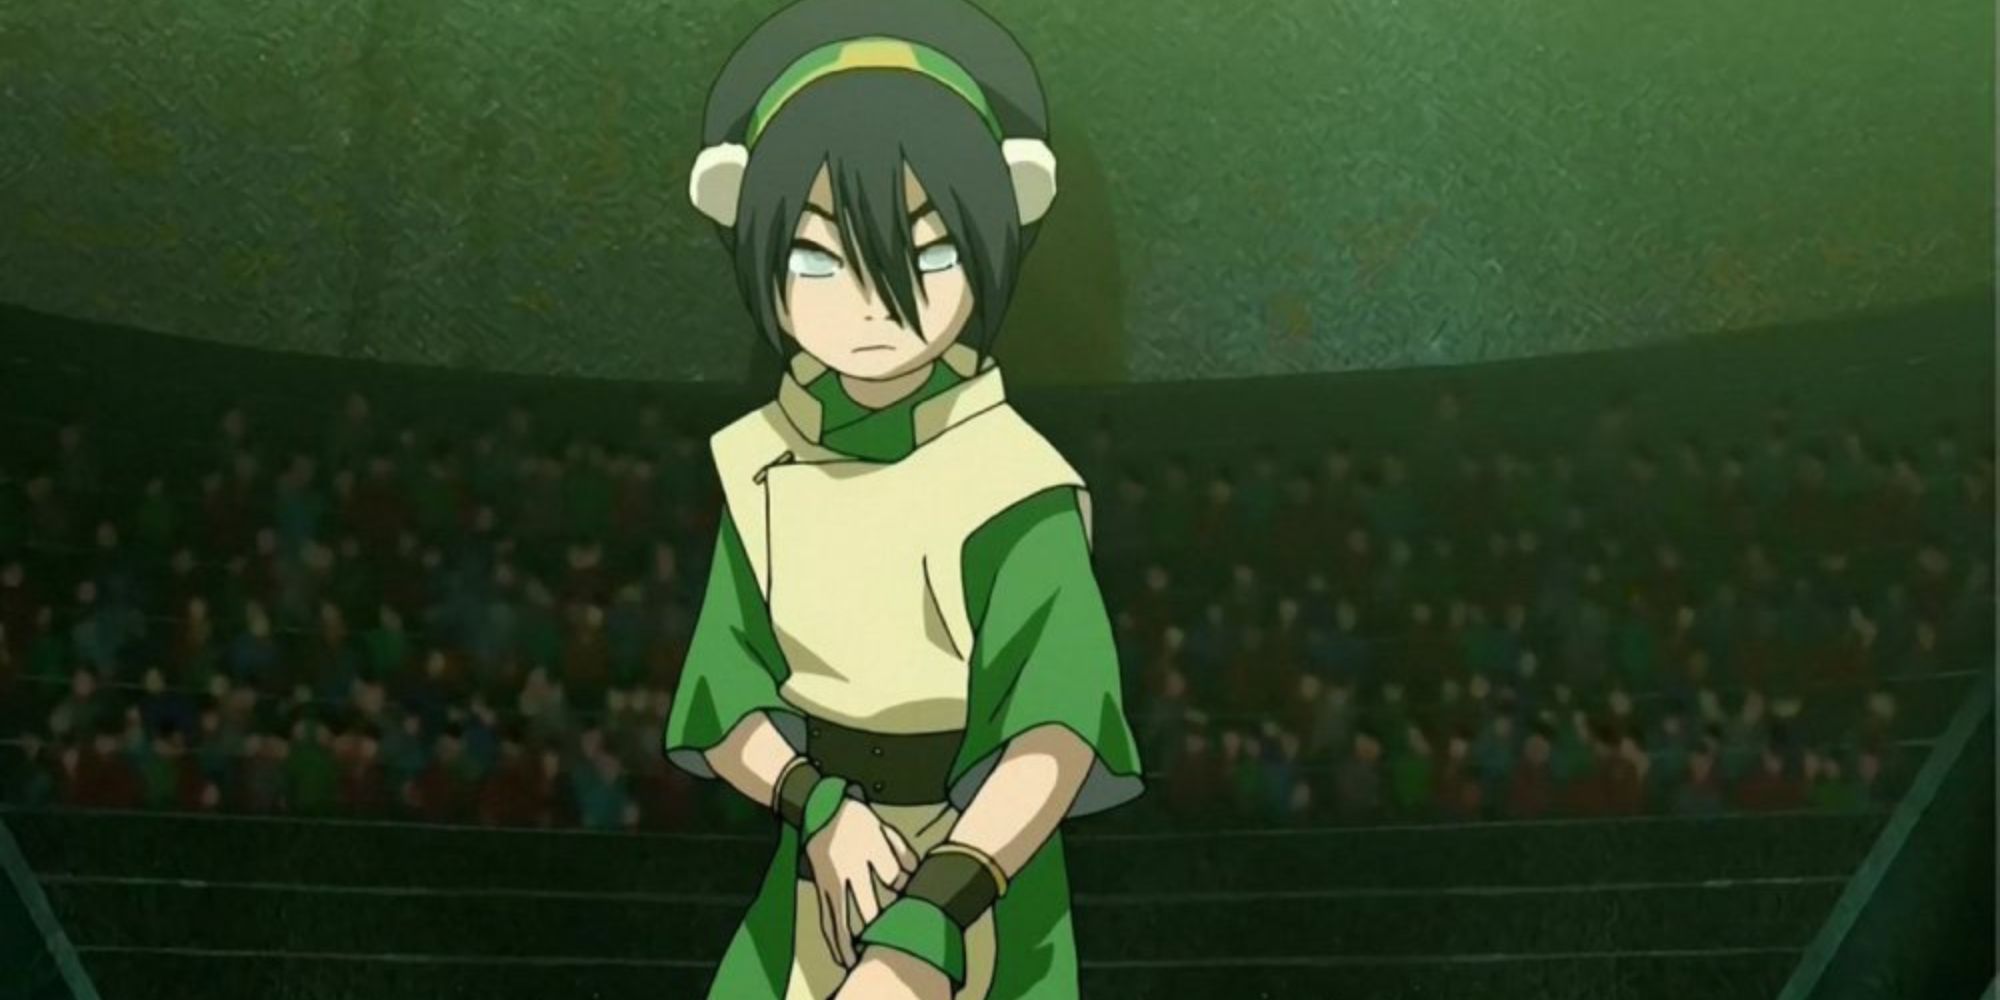 Toph earthbending in a stadium from 'Avatar: The Last Airbender'